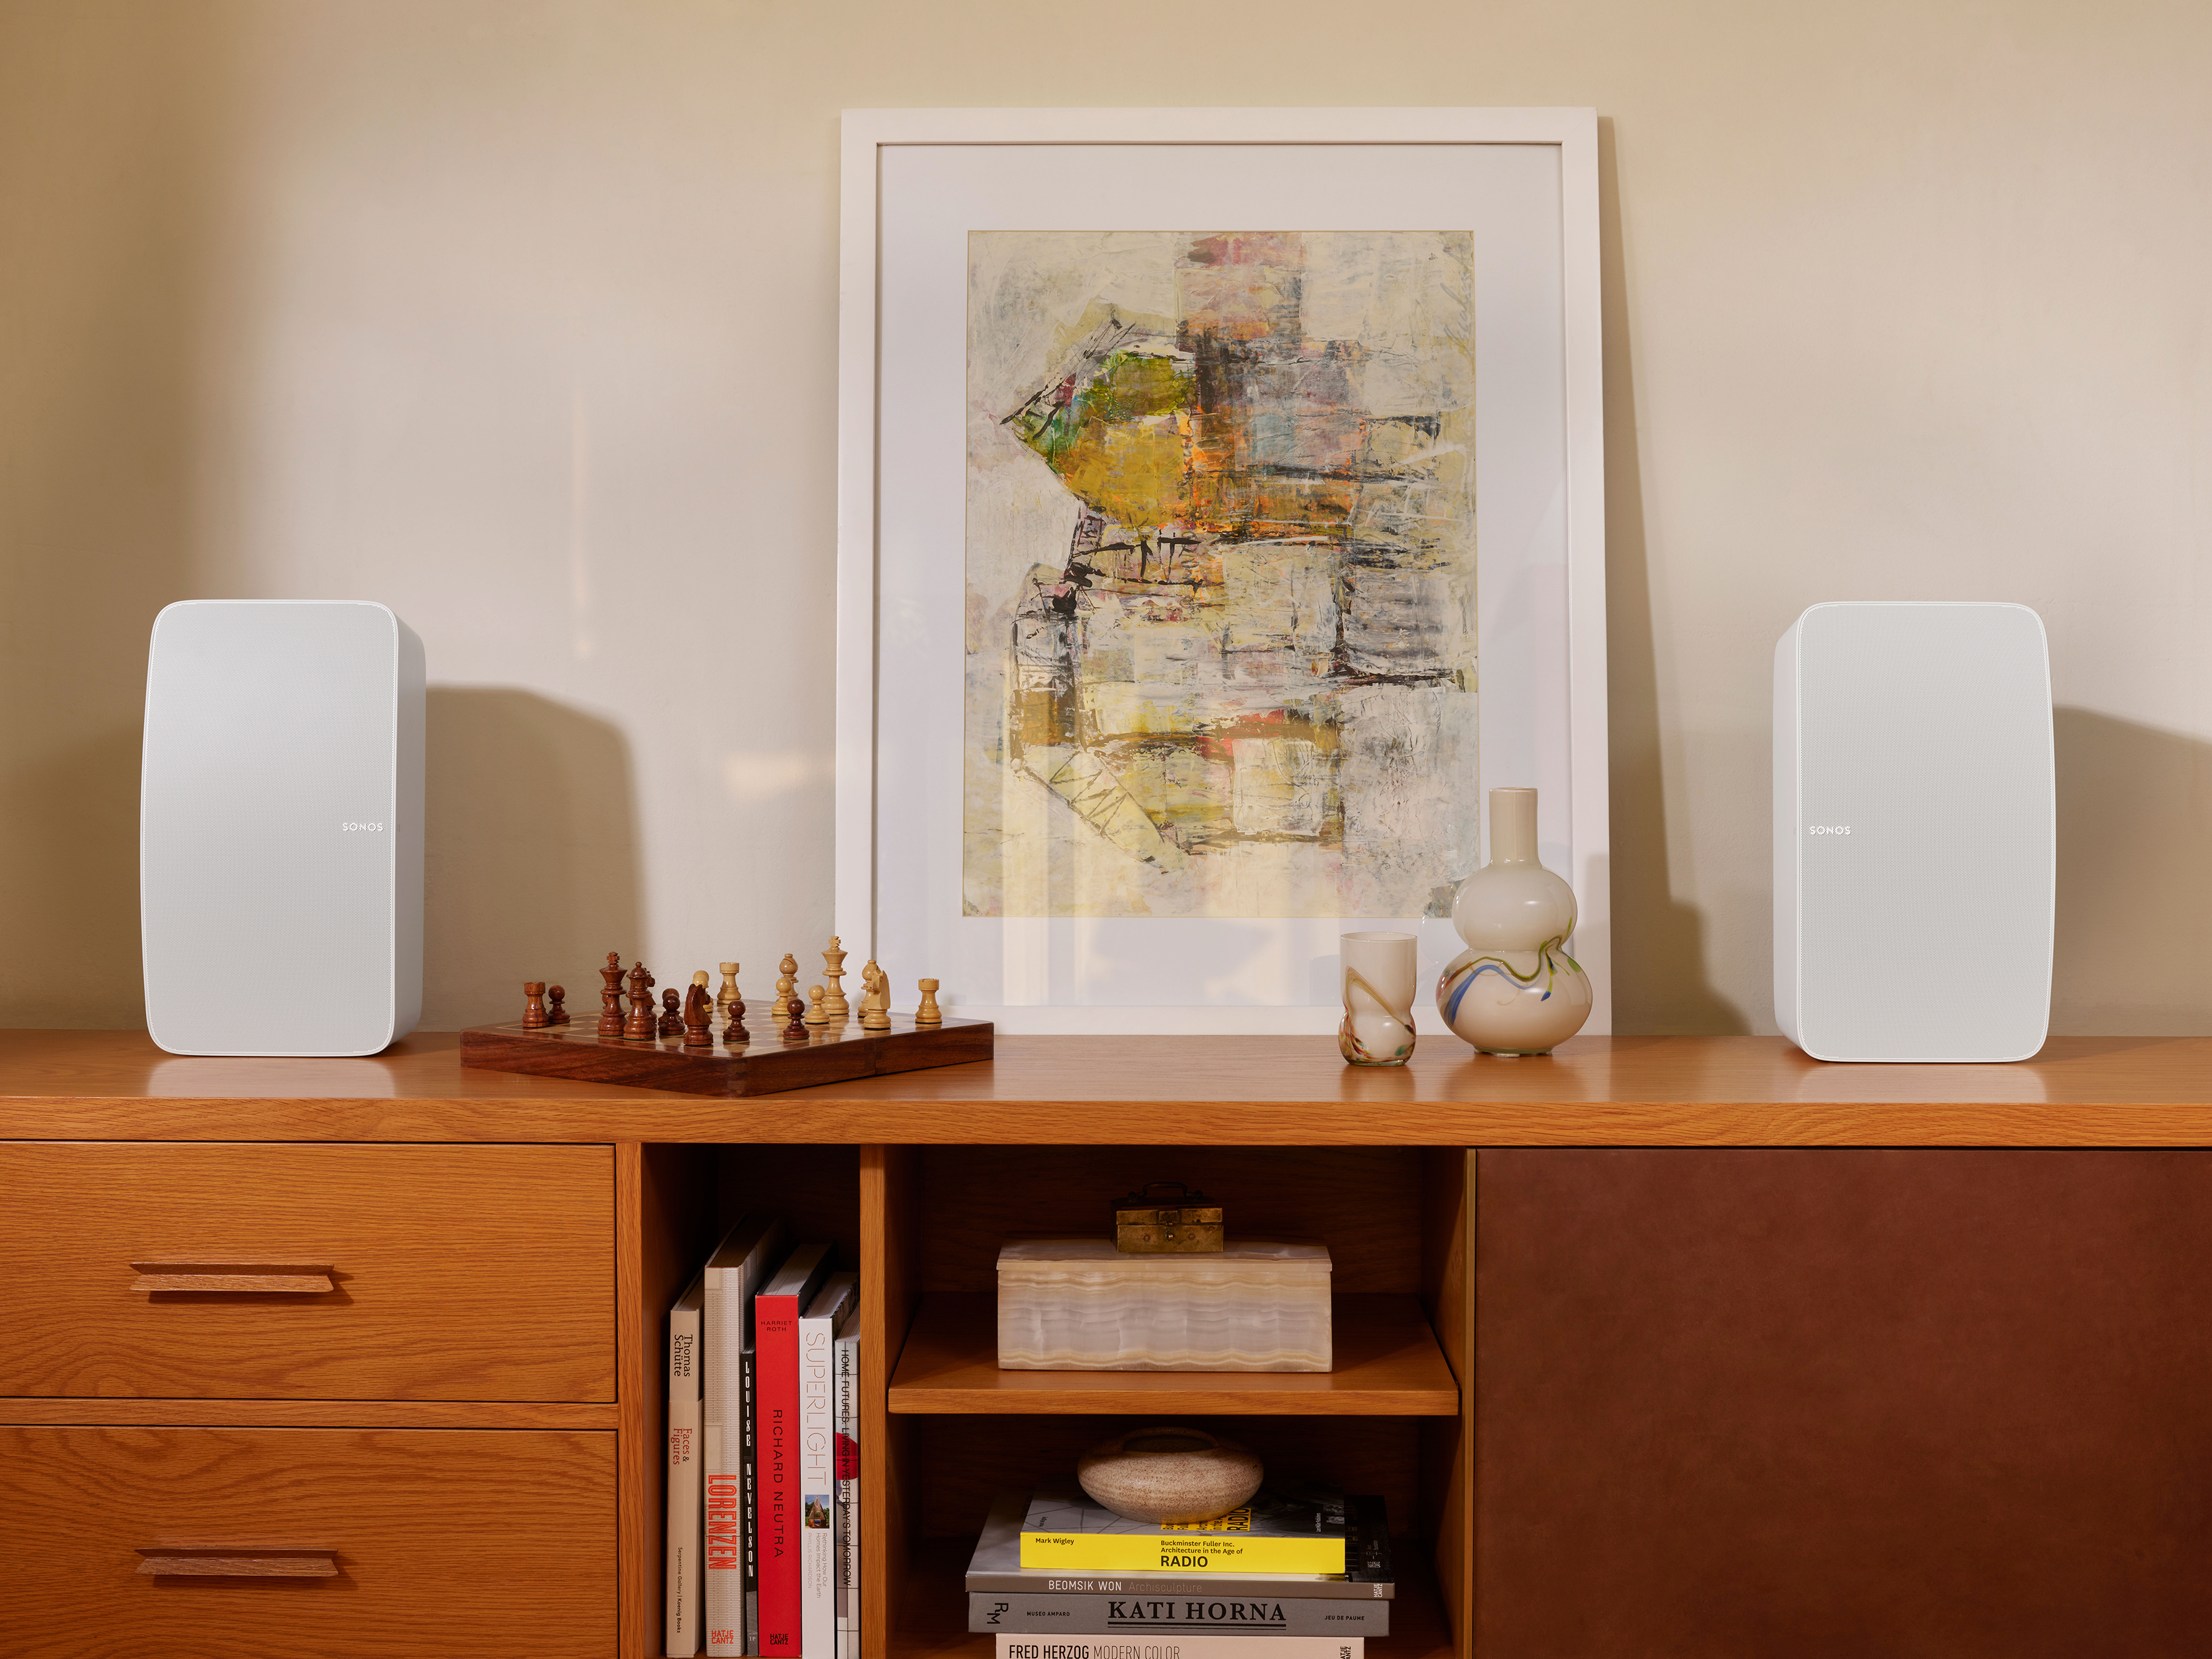 4) There’s more from Sonos